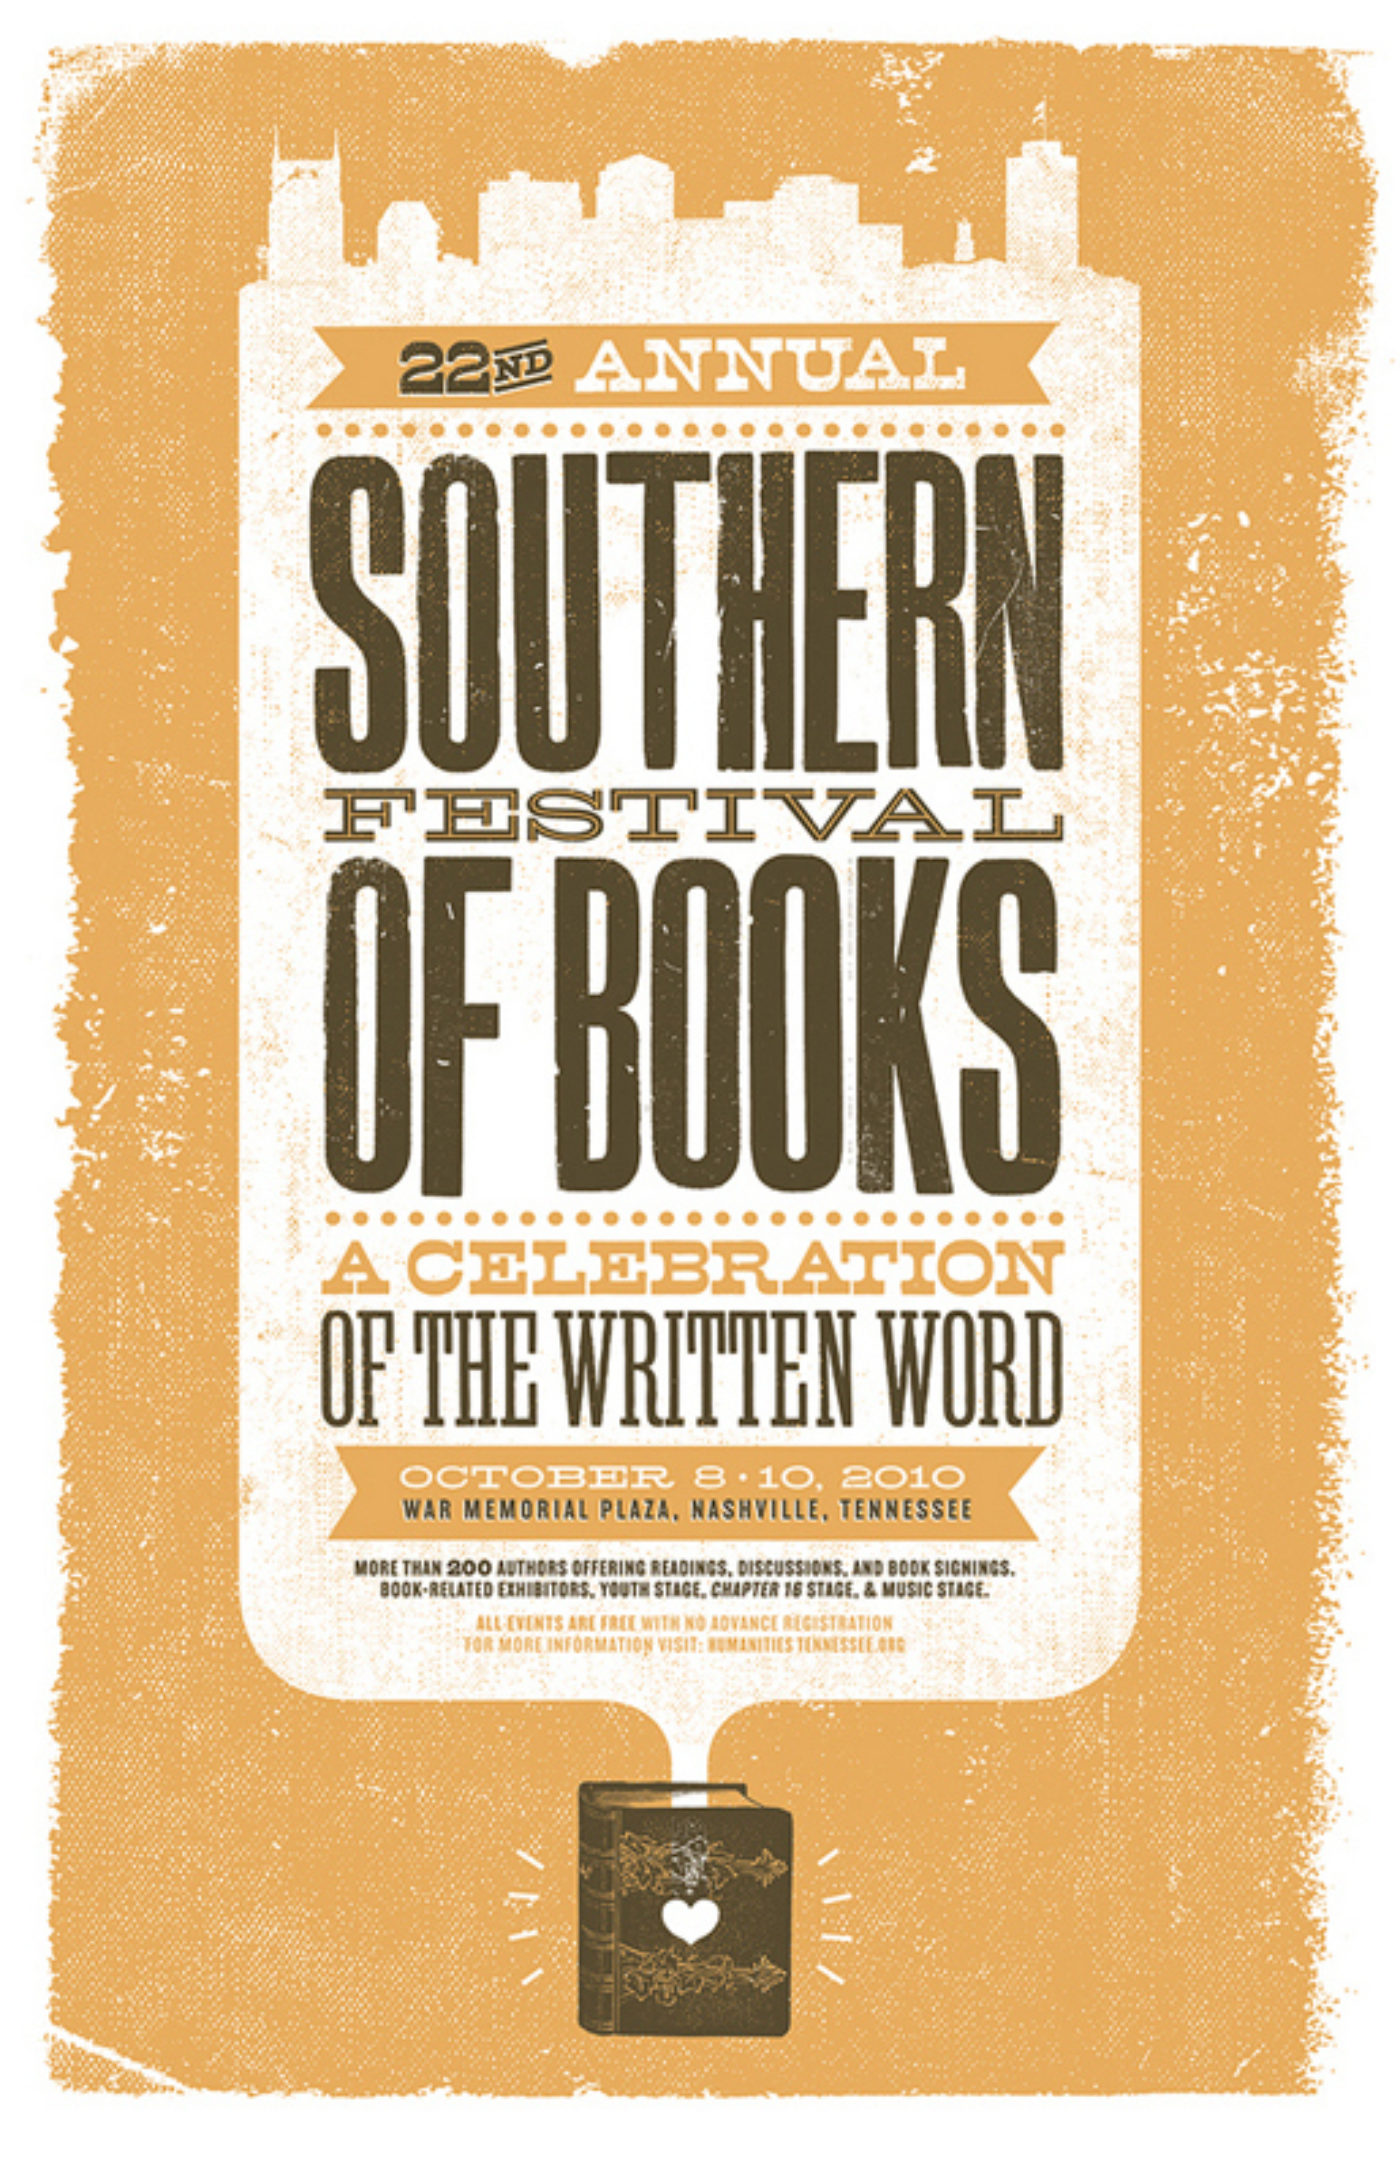 Southern festival of books | Veerle's Blog 4.0